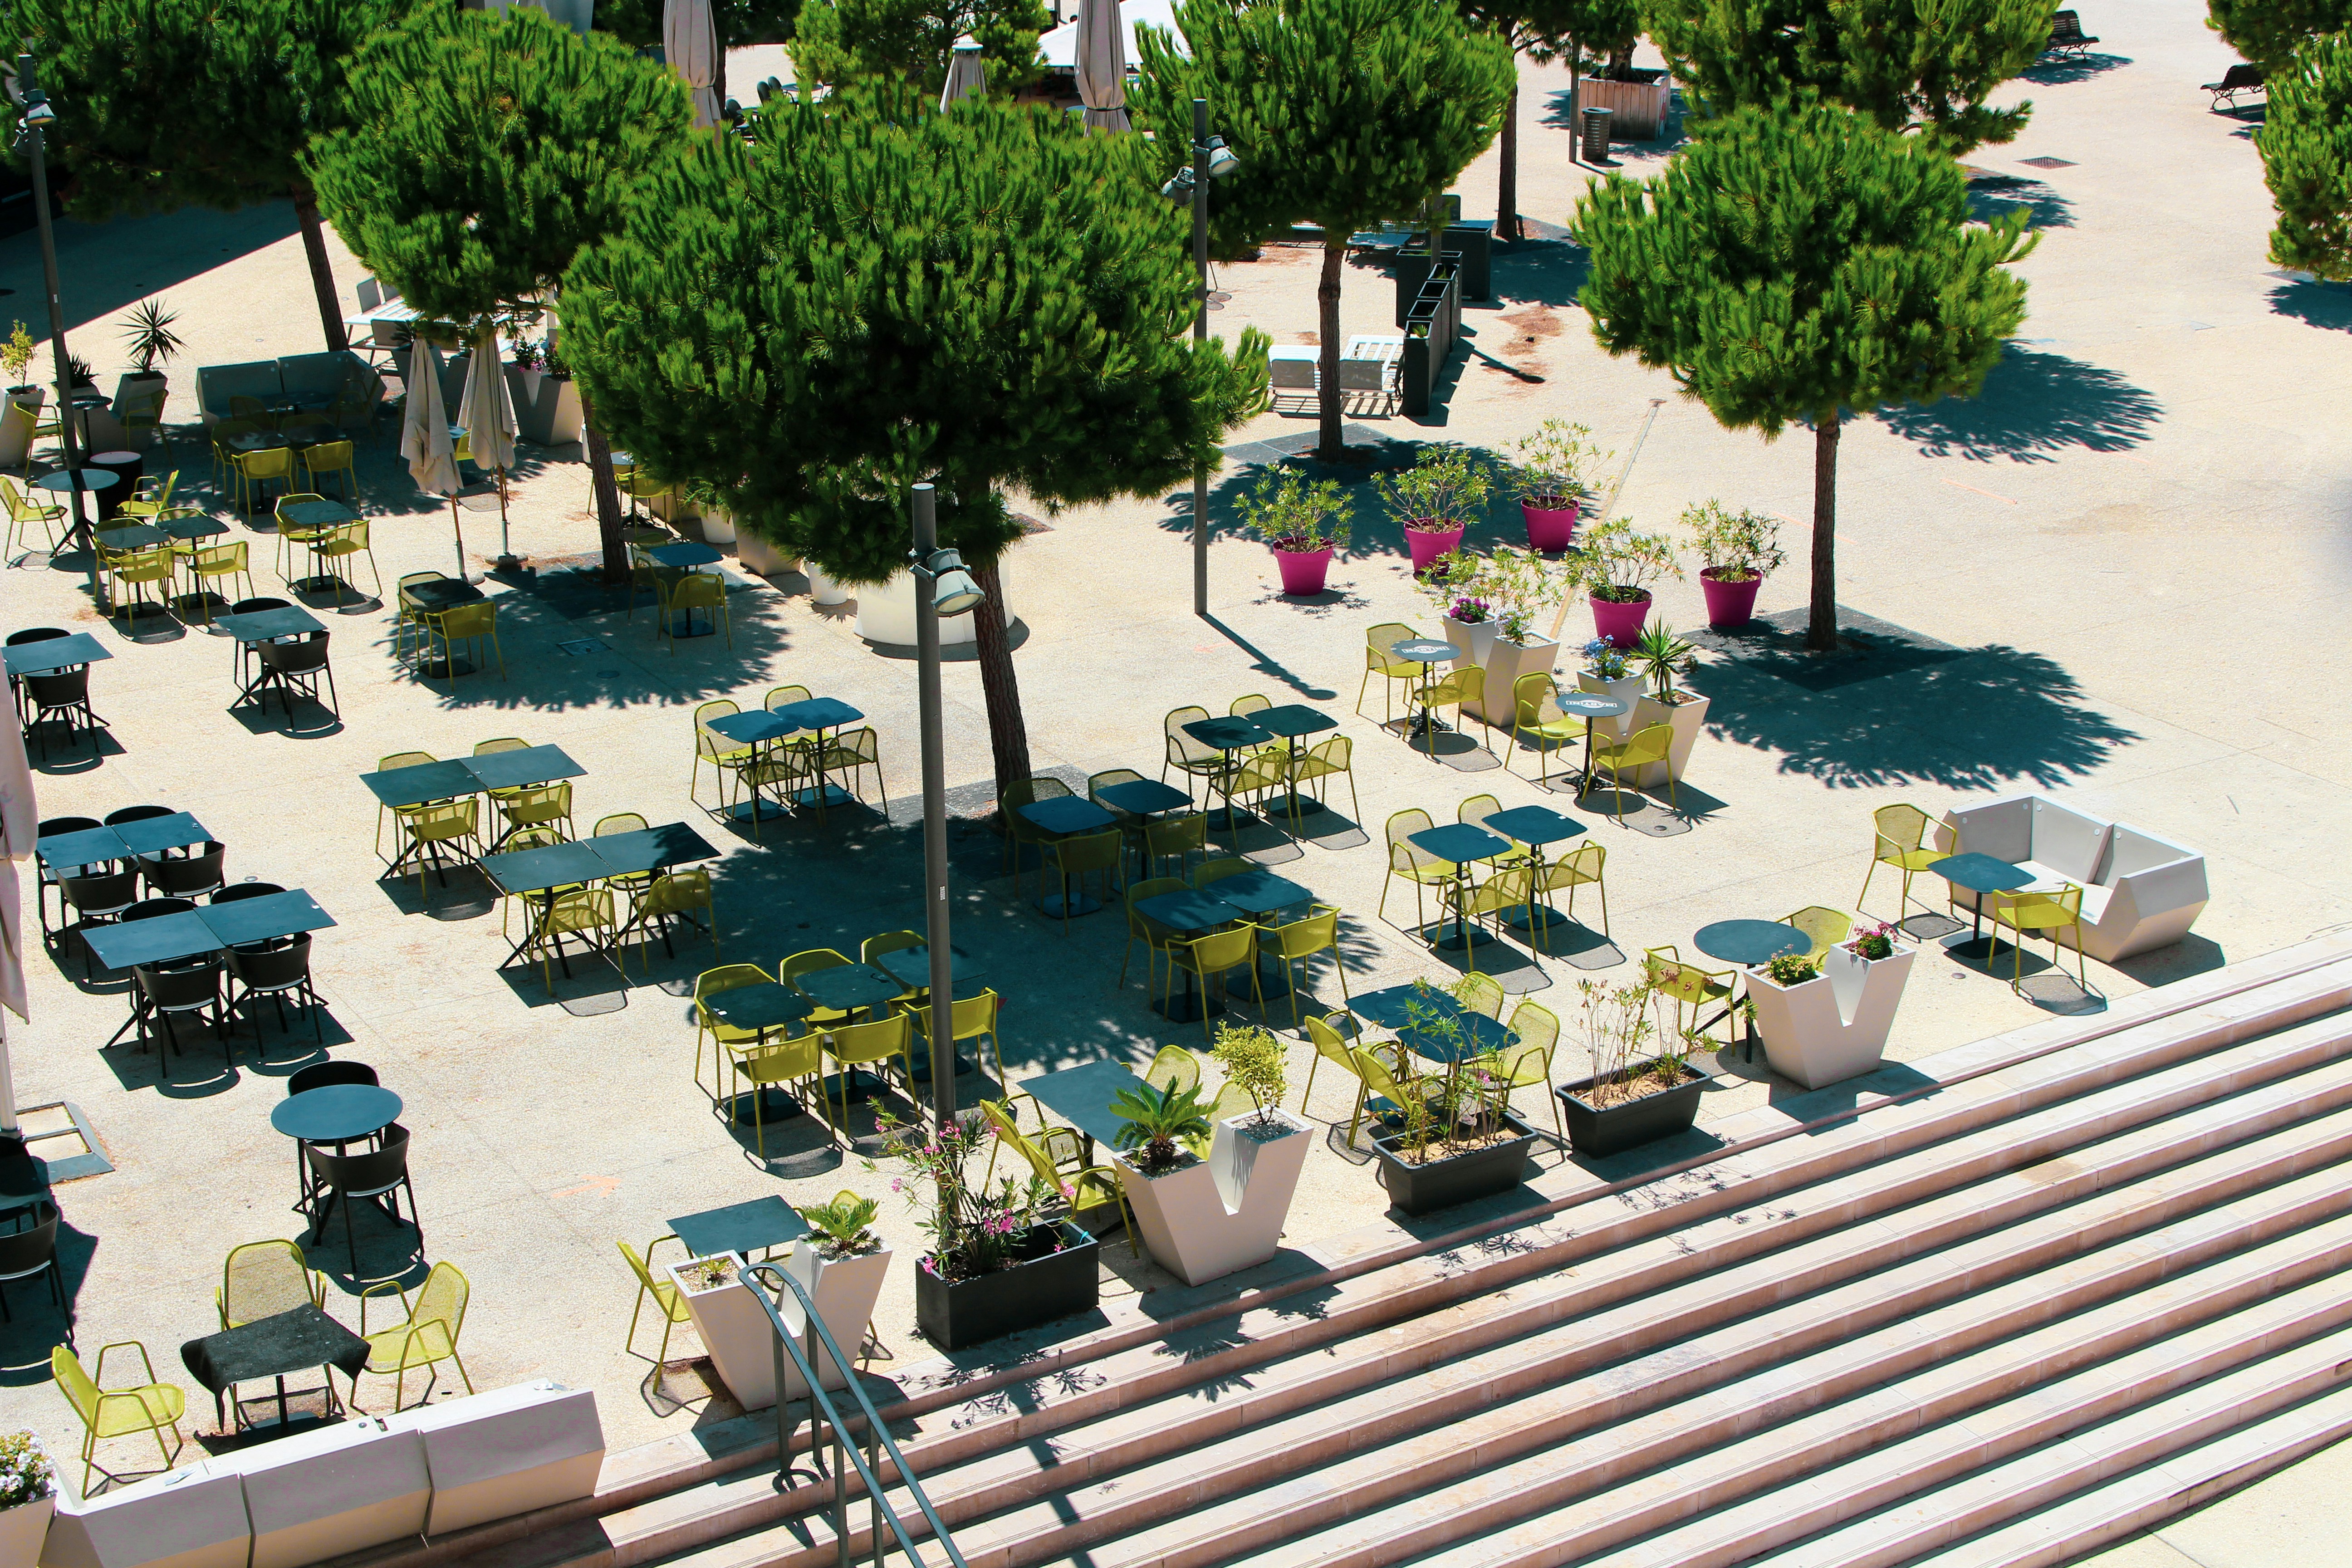 Empty tables viewed from the cathedral terrasse: squares and stripes.